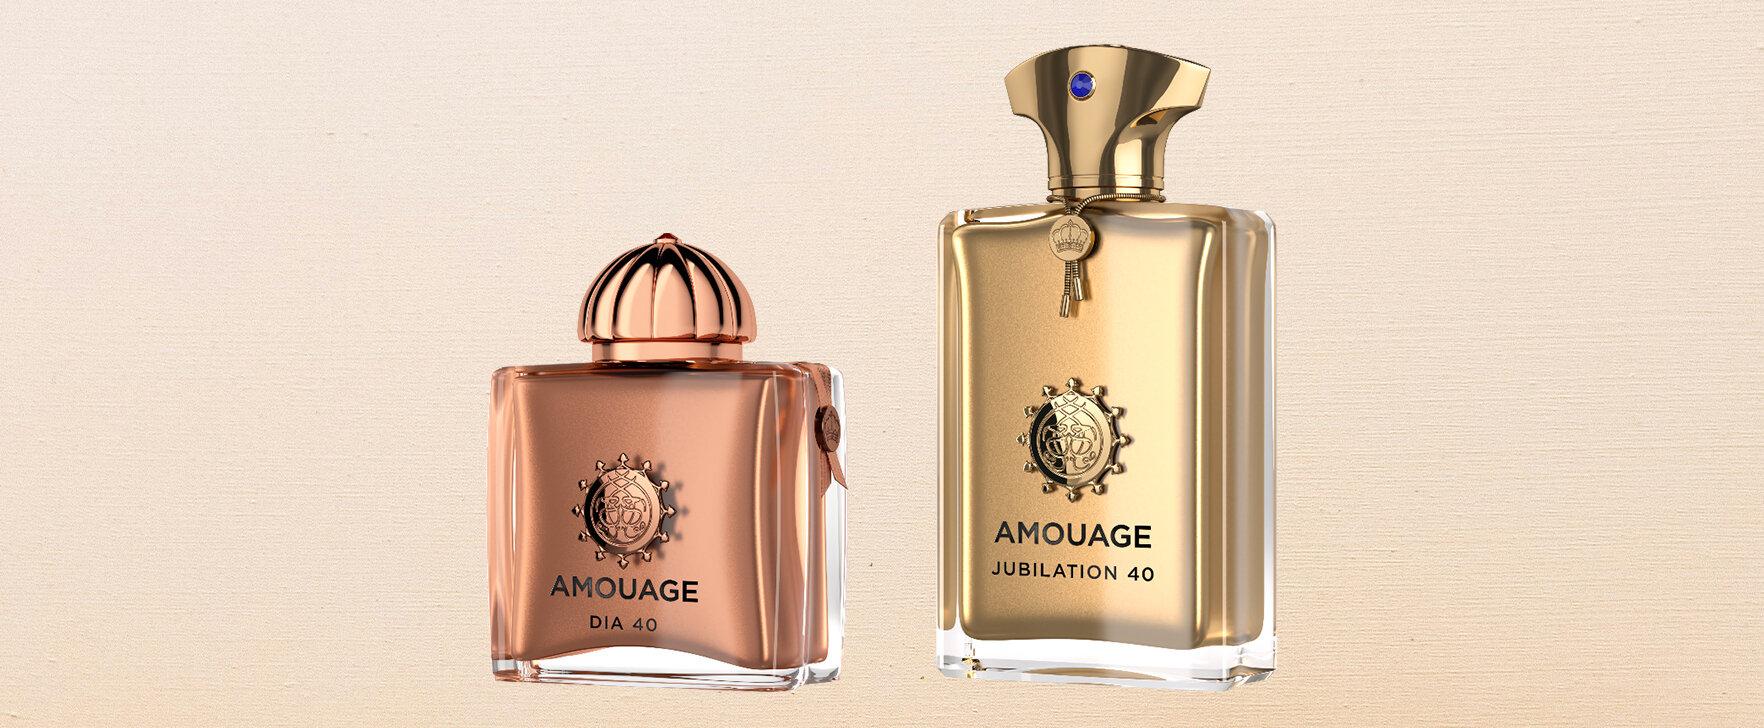 "Dia 40" and "Jubilation 40": The New Extraits de Parfum From Amouage